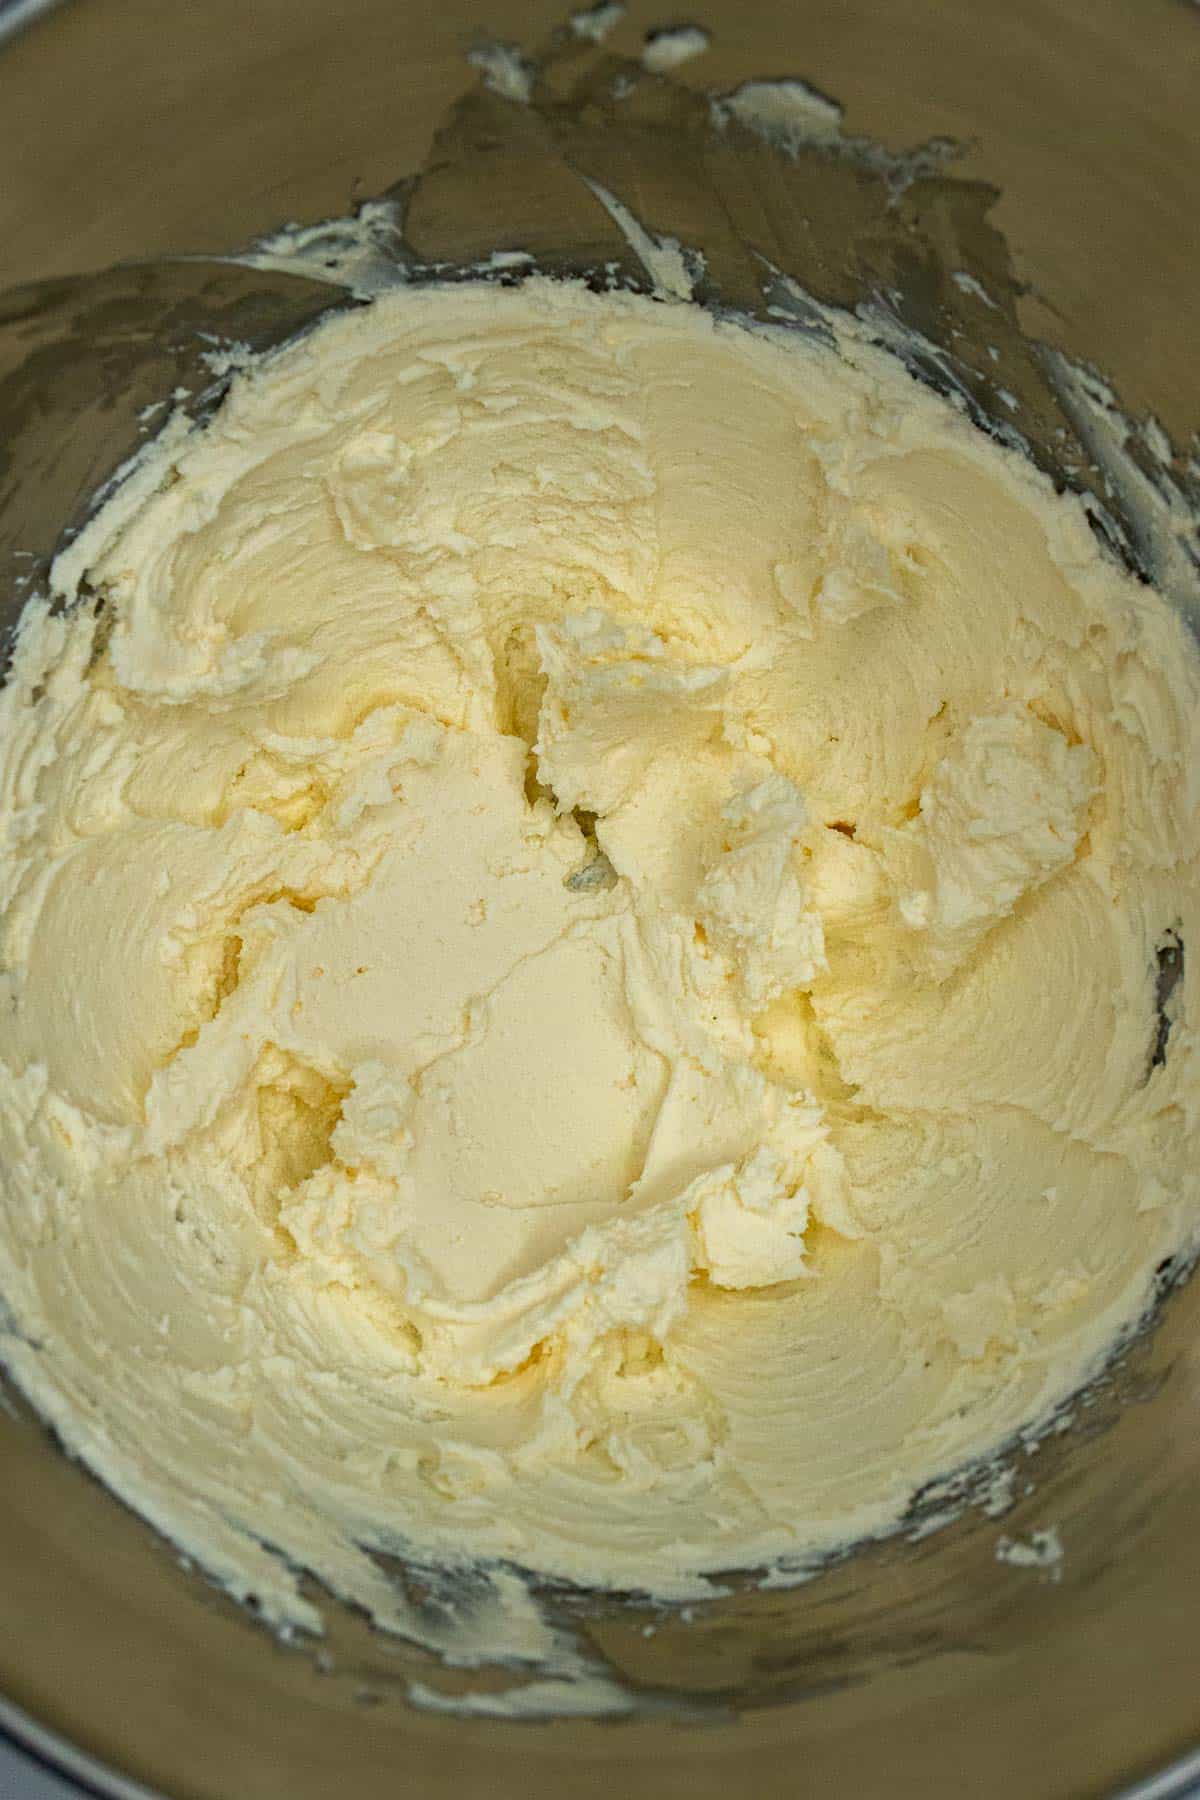 Butter and cream cheese creamed together for frosting.